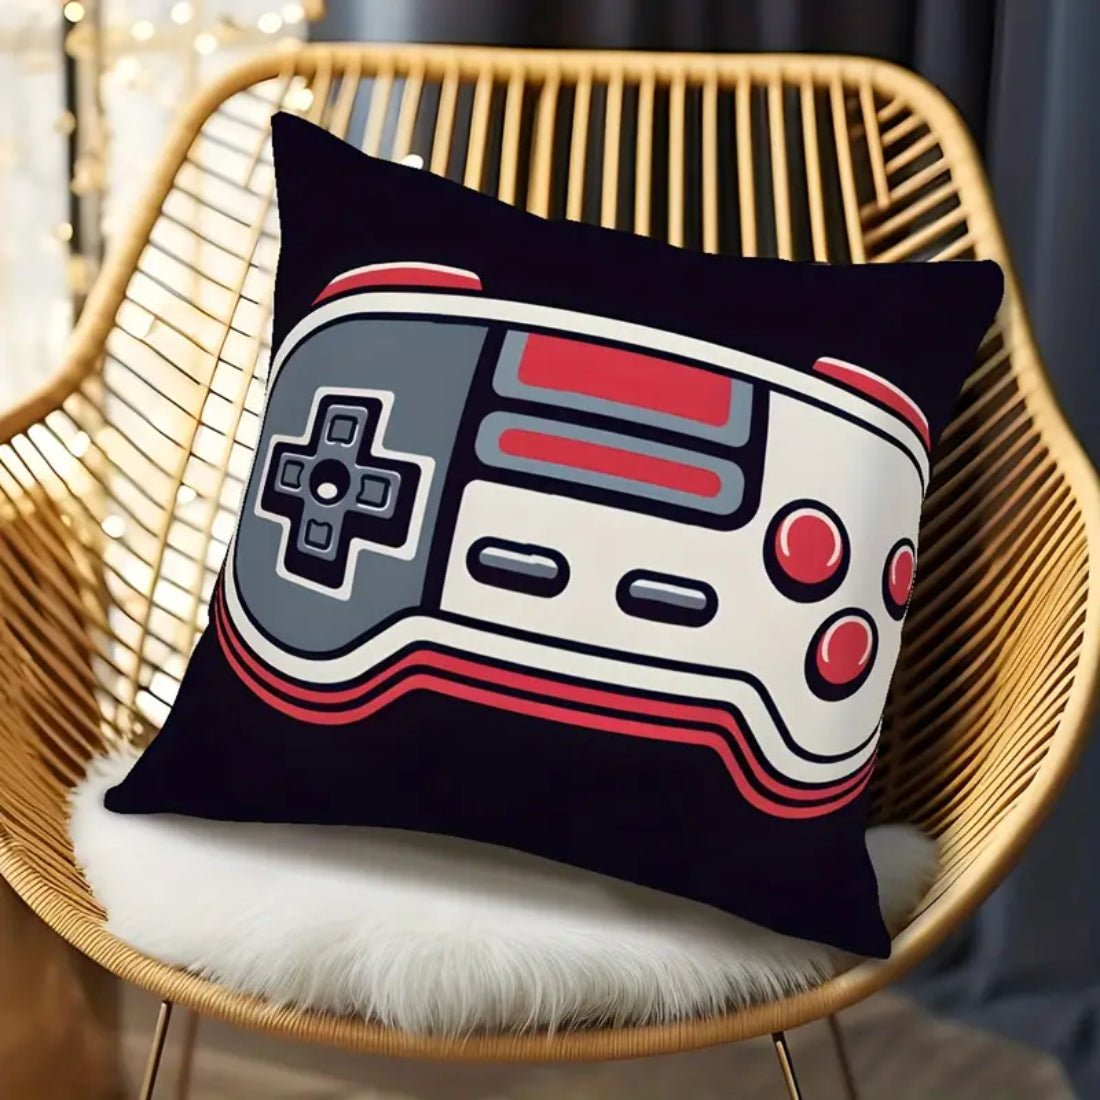 Game Controller Square Modern Style Pillow cover - Gamepad 4 (45x1x45cm) - غلاف وسادة - Store 974 | ستور ٩٧٤